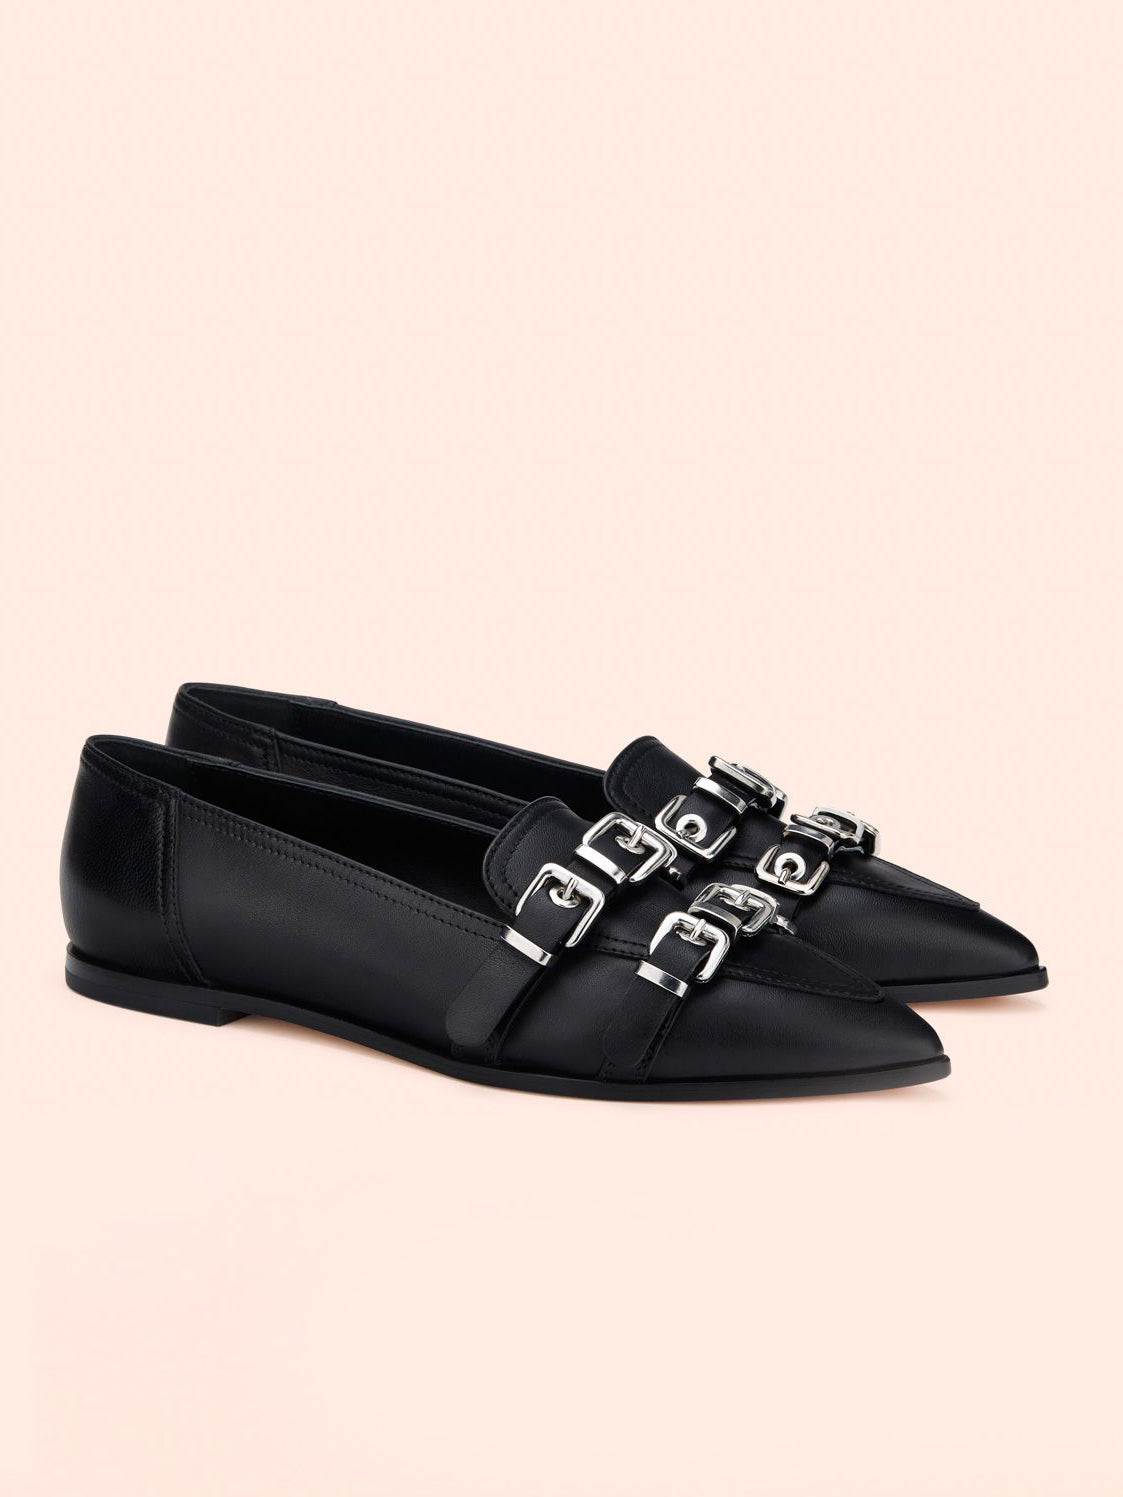 Ballet flats with buckles, black